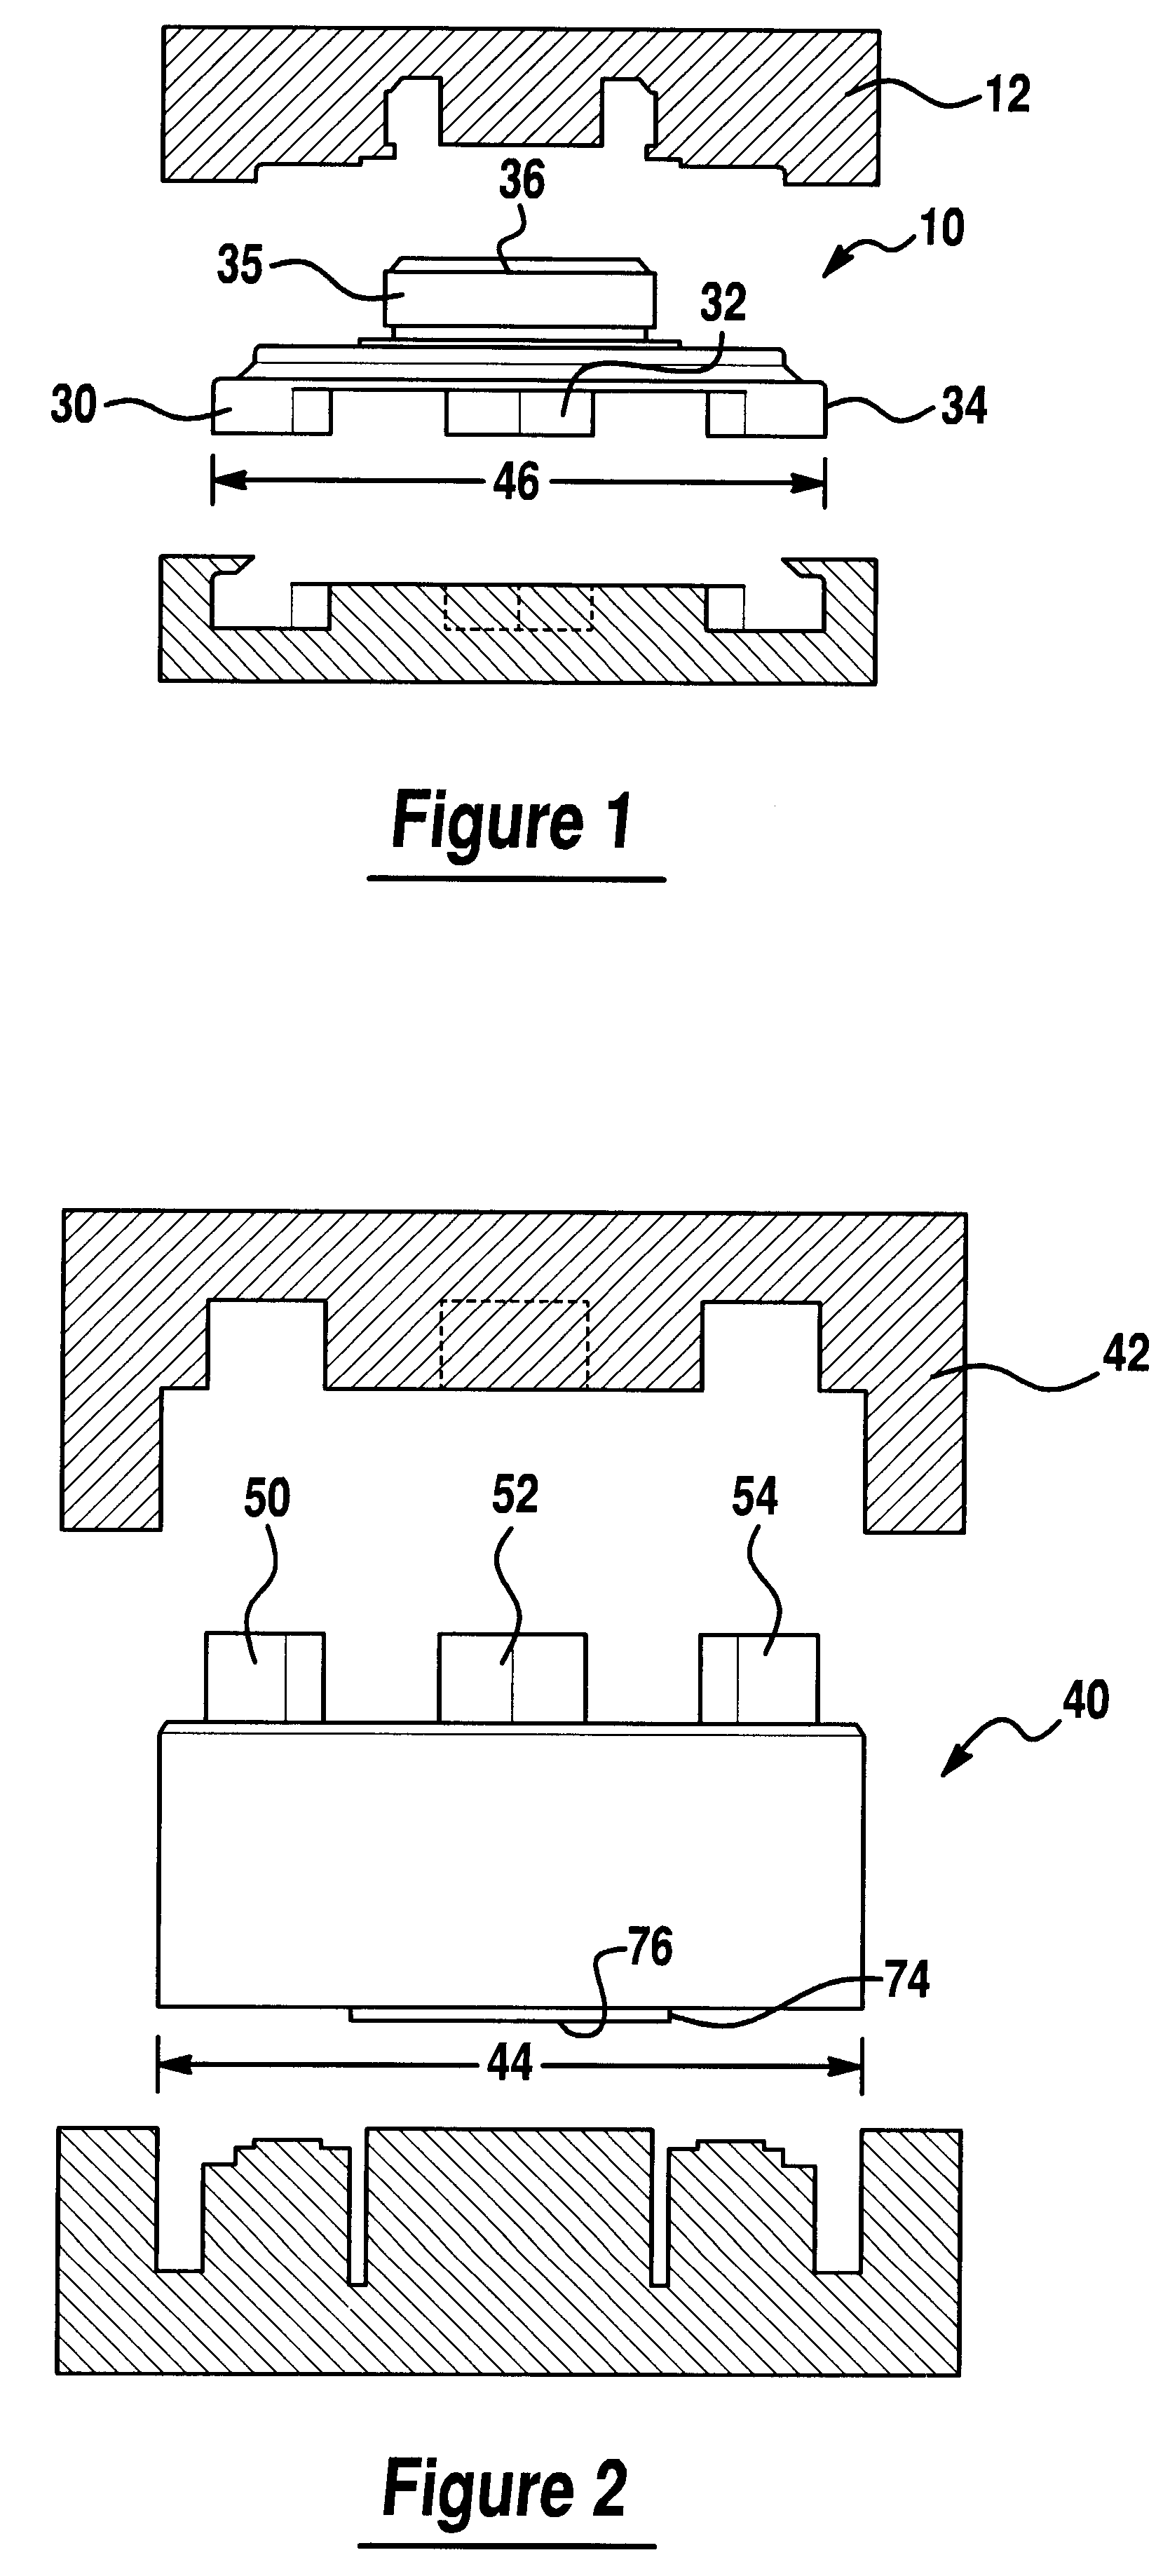 Method for creating a gear assembly